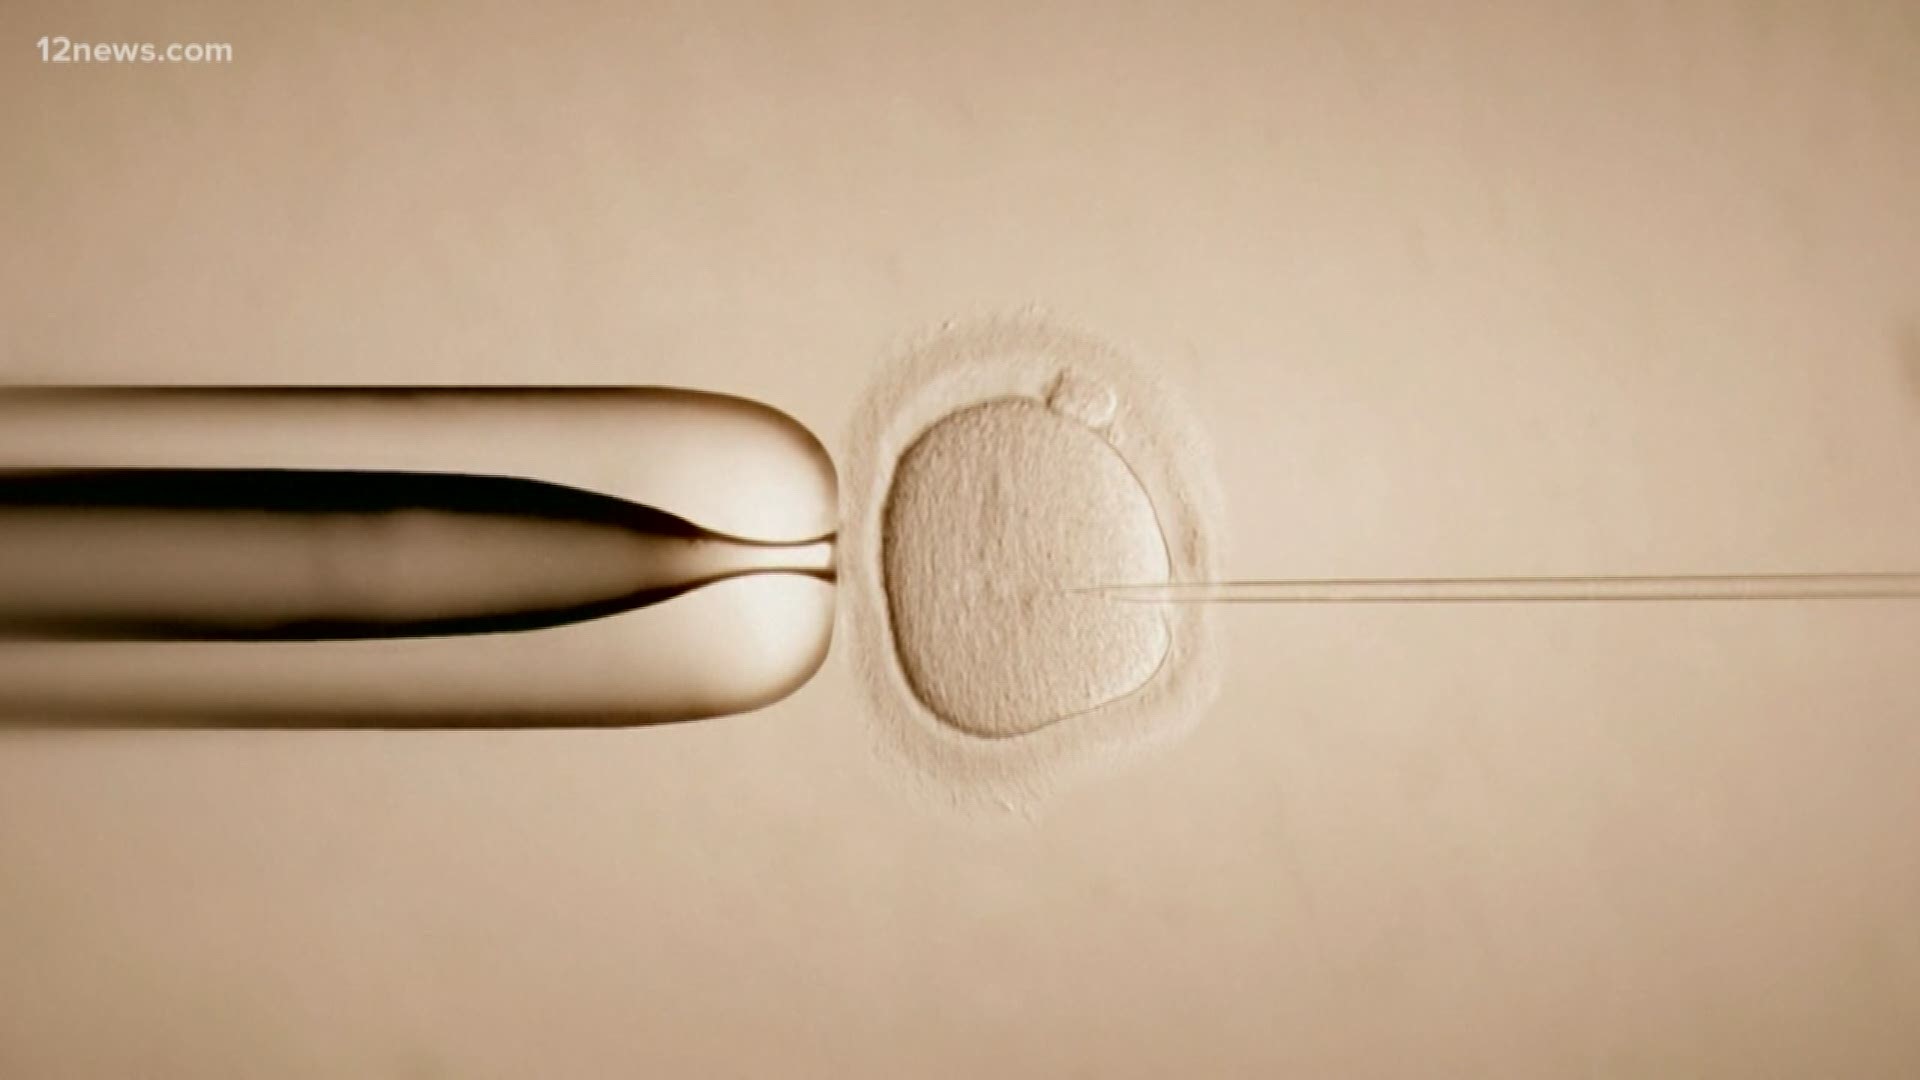 The Arizona Court of Appeals has ruled in a first-of-its-kind case that a woman could implant the embryos she created with her now-ex-husband.